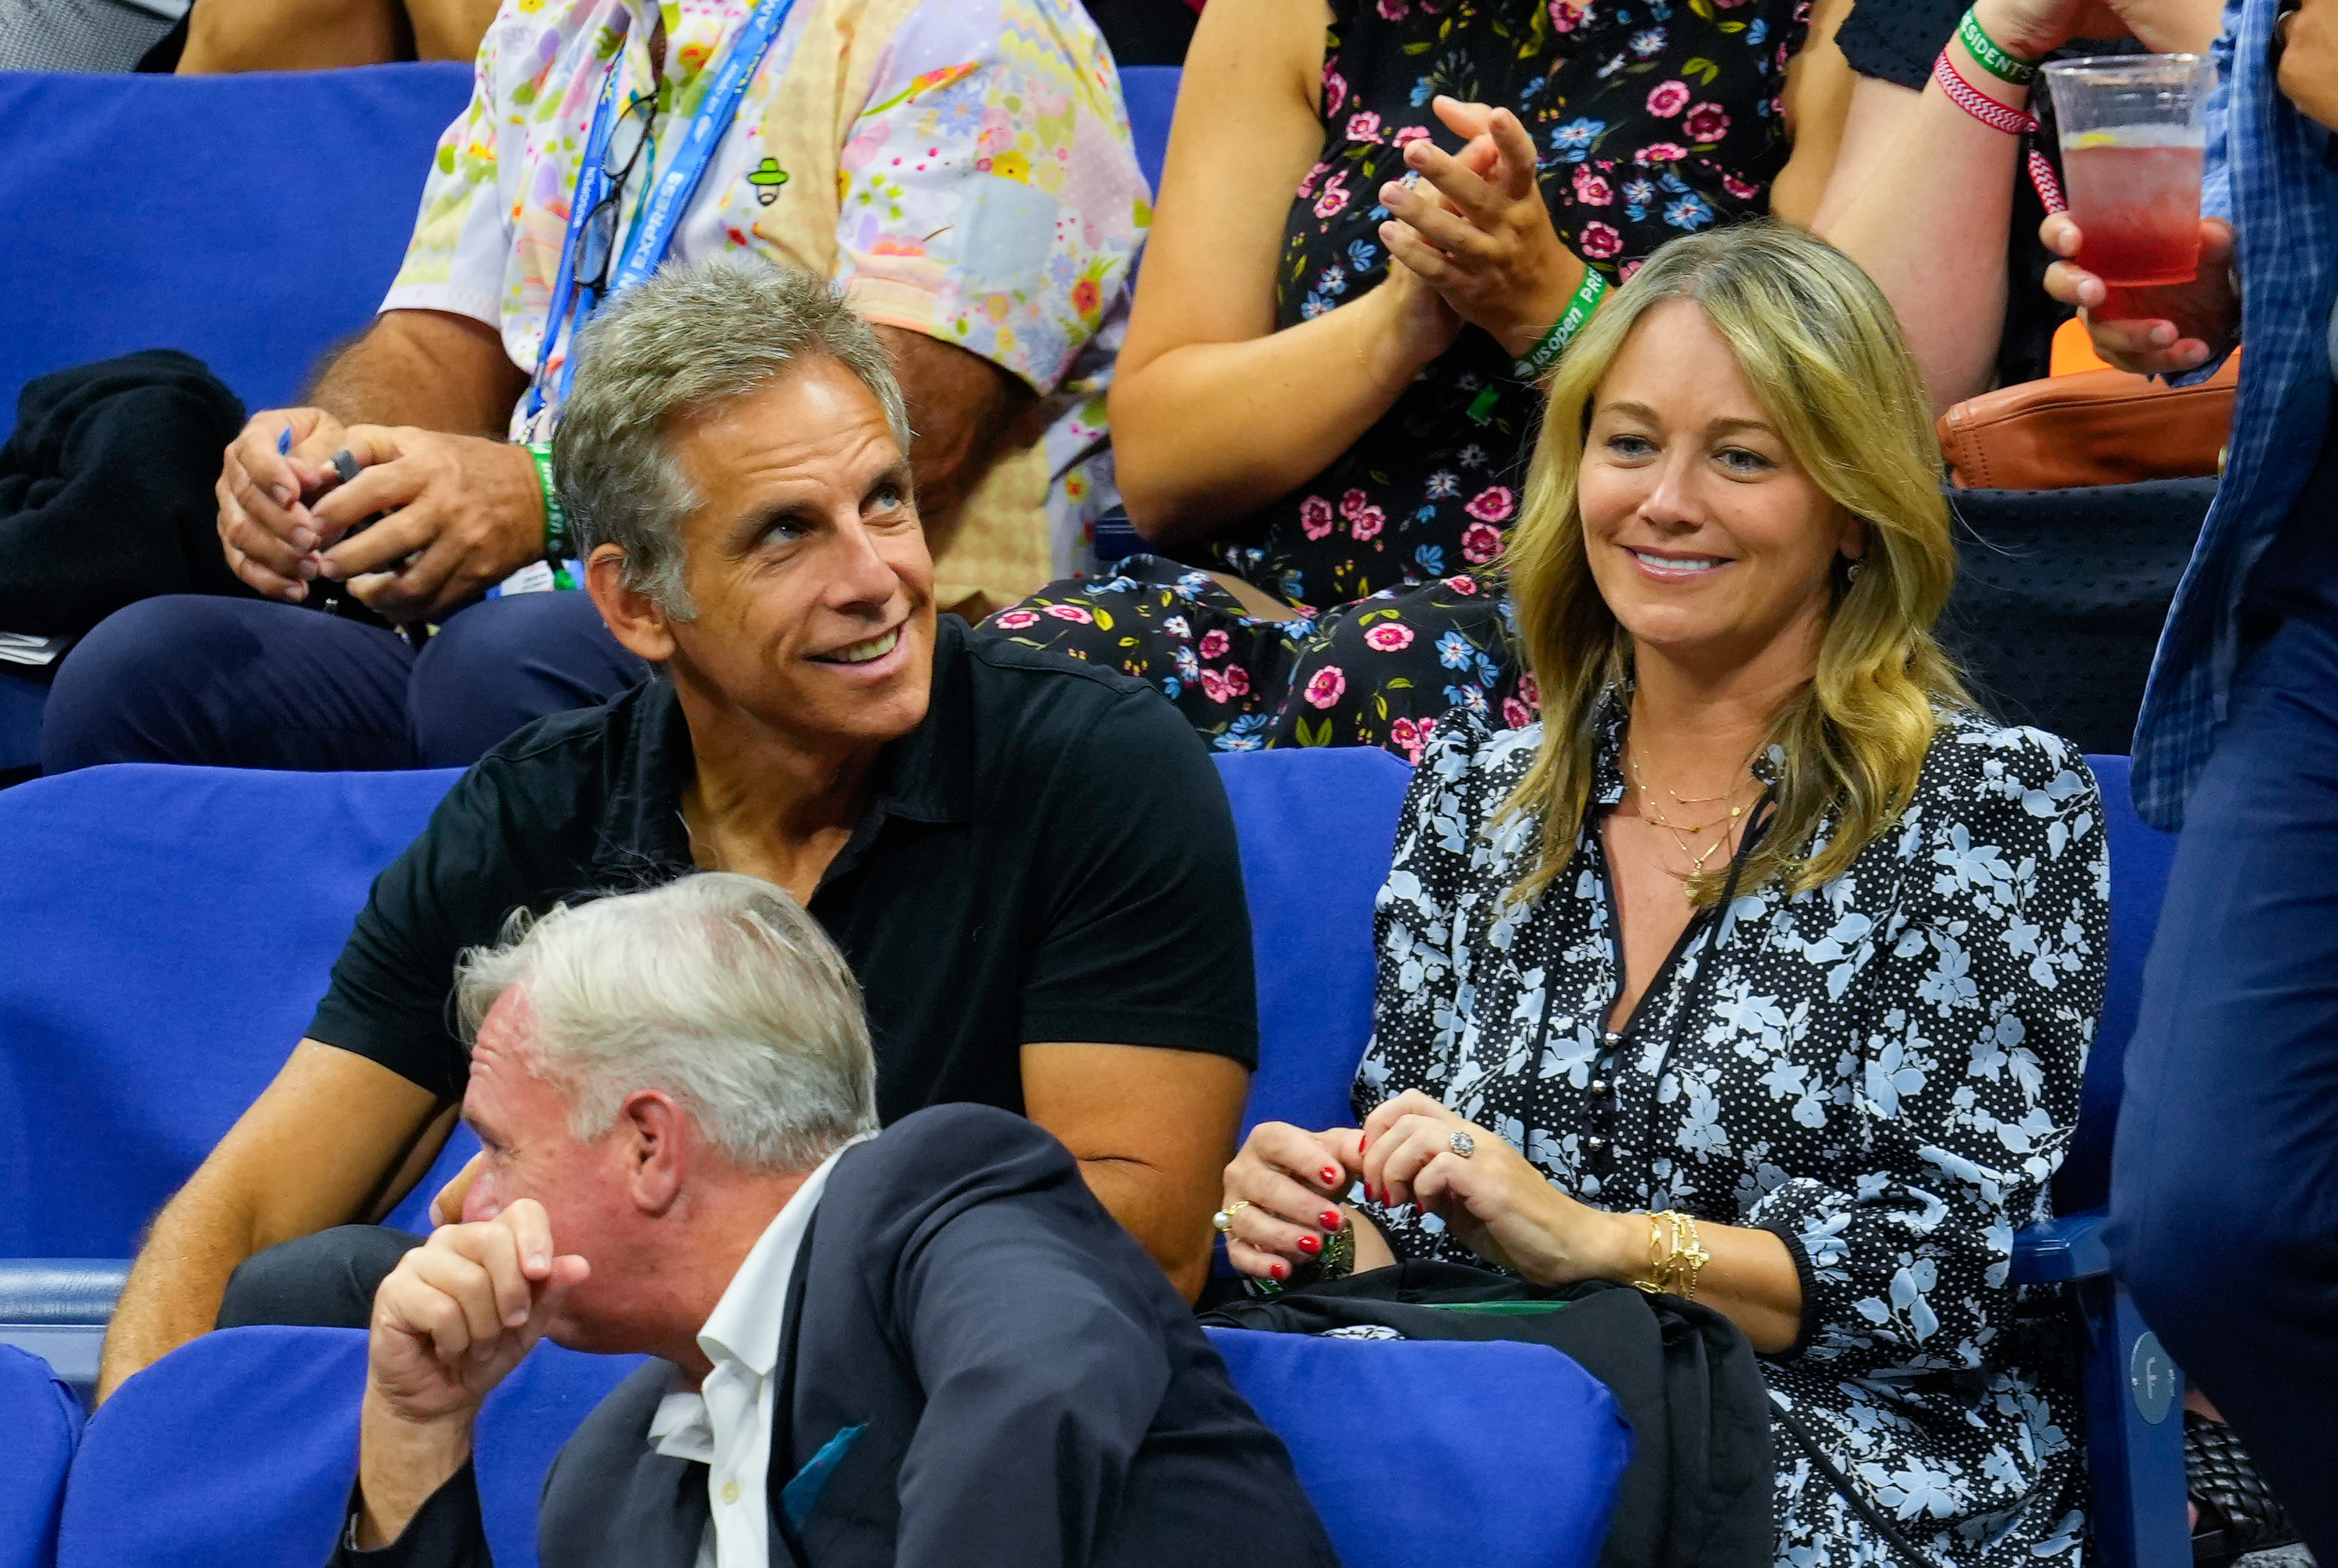 The two smiling as they sit at a sports event